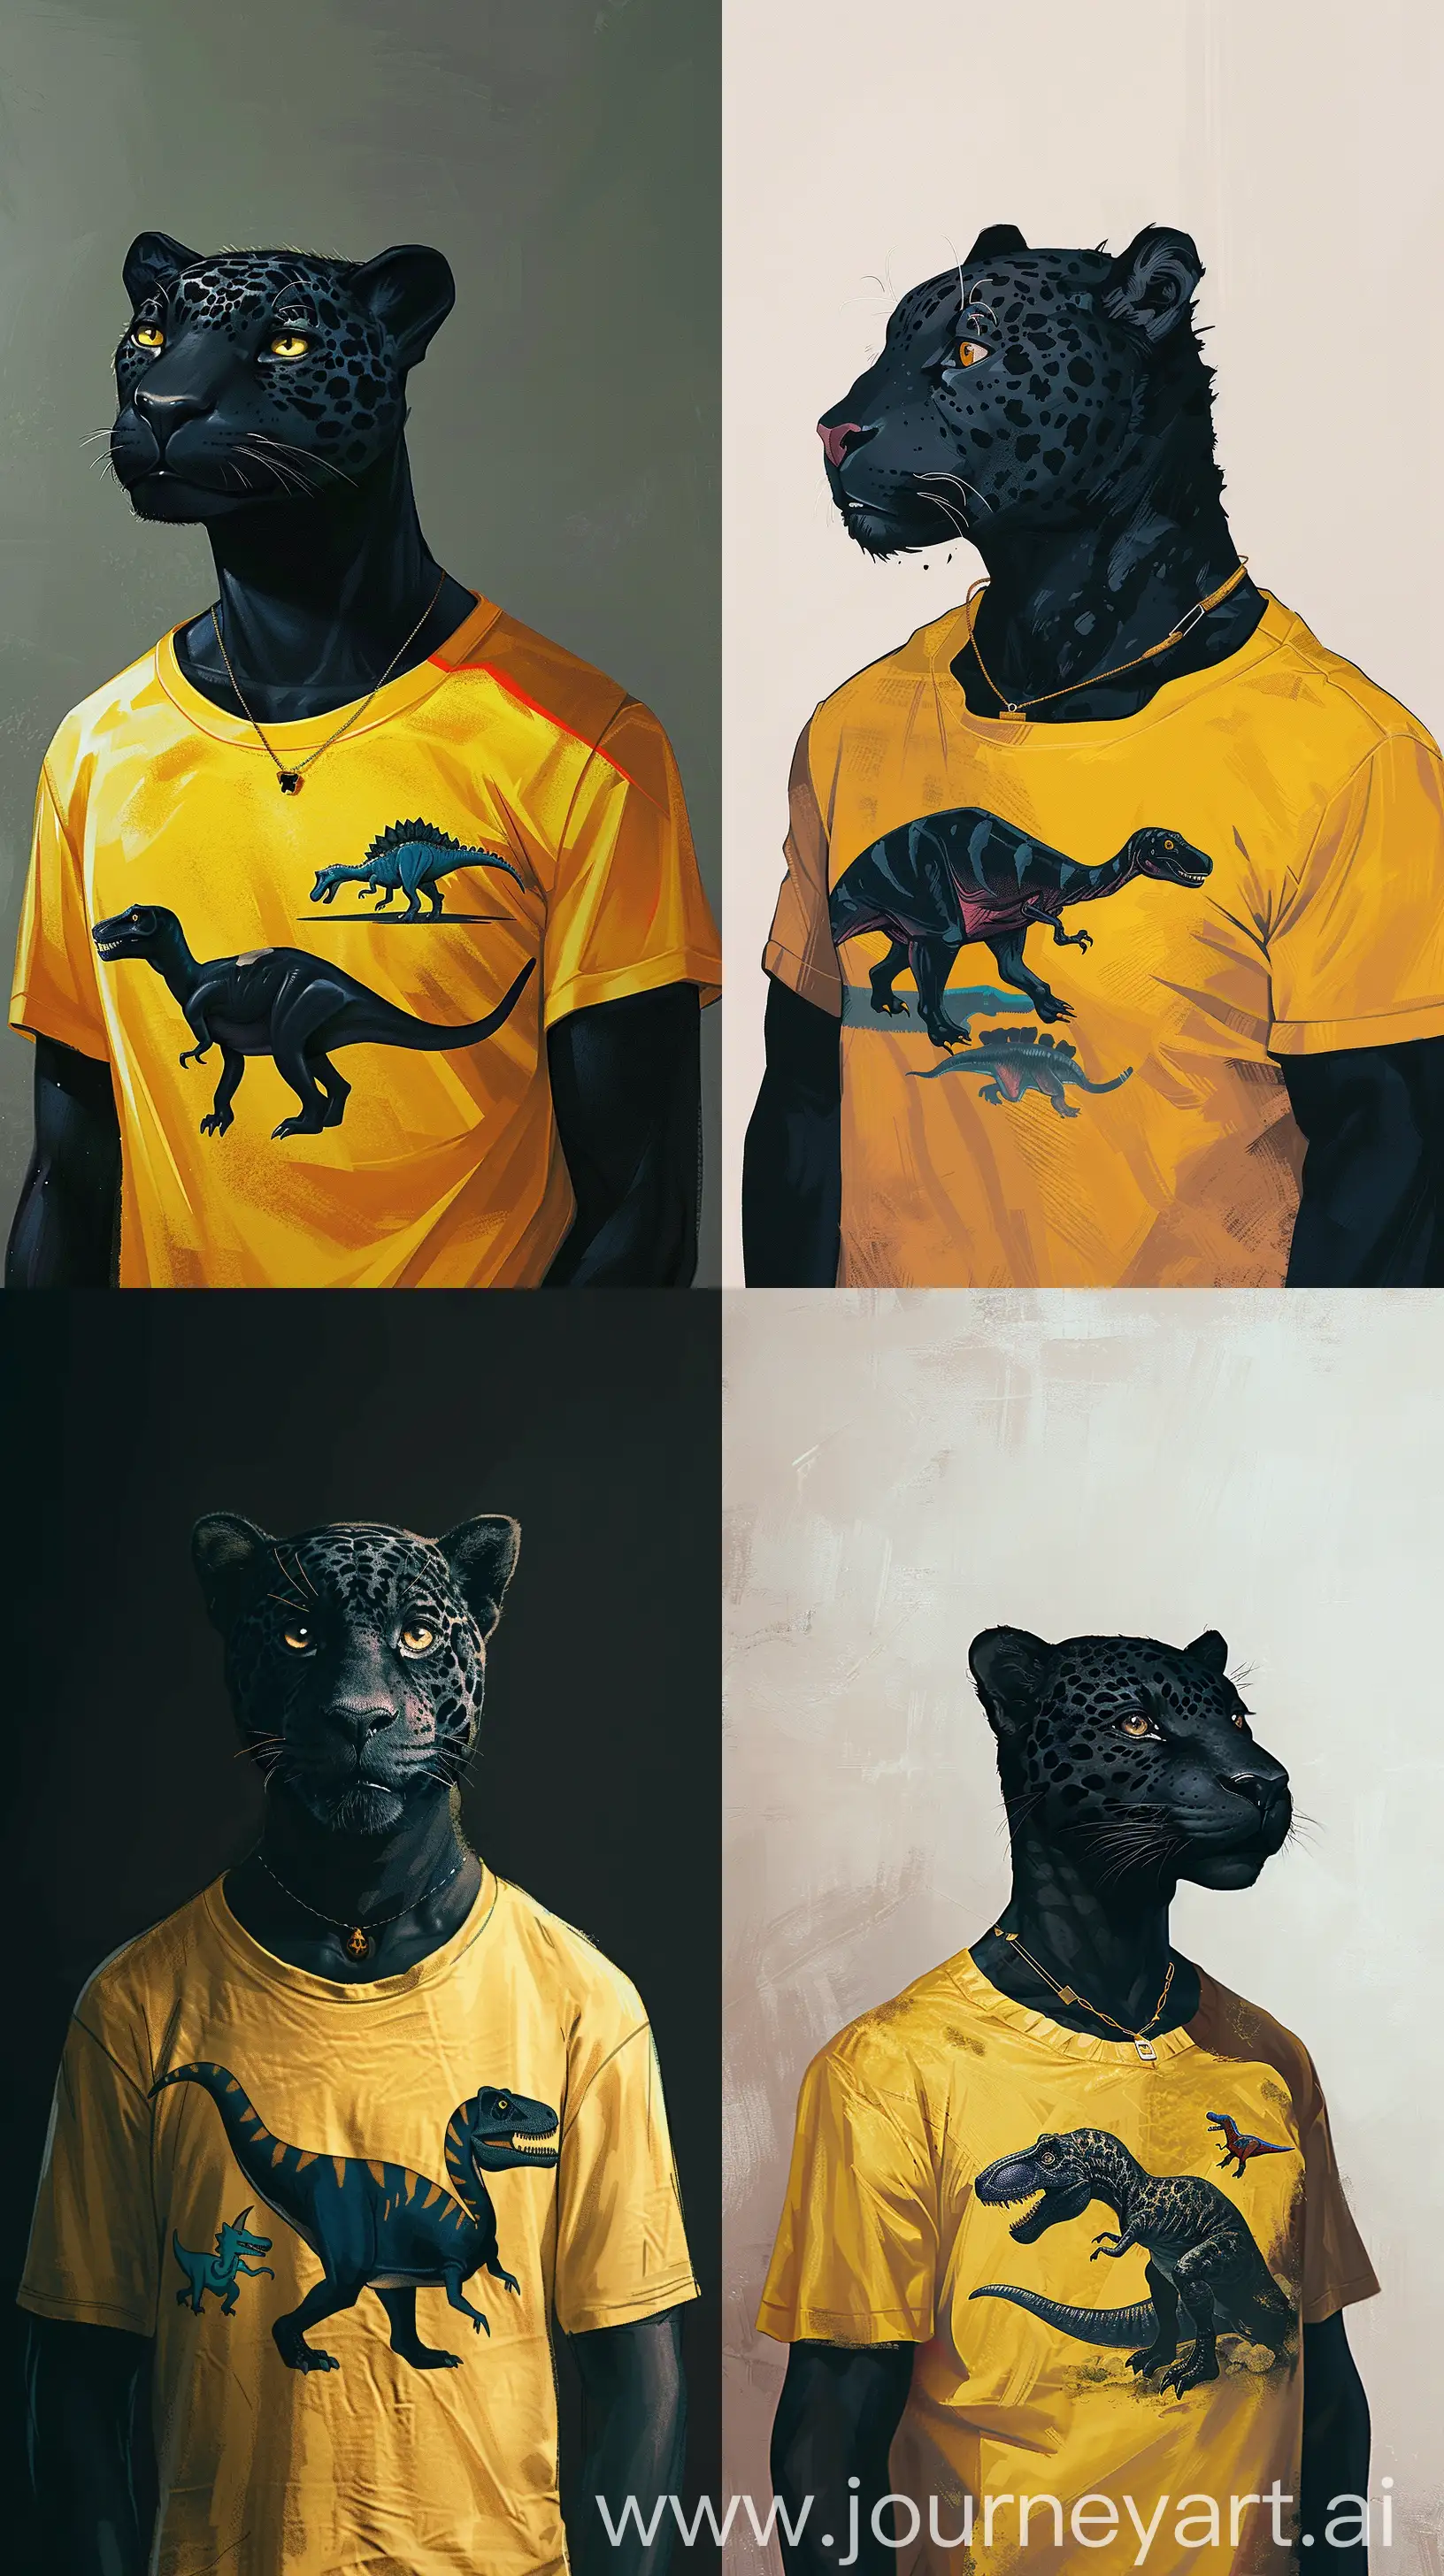 William wry art style of a black jaguar as a man with black body , wearing a yellow t shirt with a dinosaur on it, as phone wallpaper,  --ar 9:16